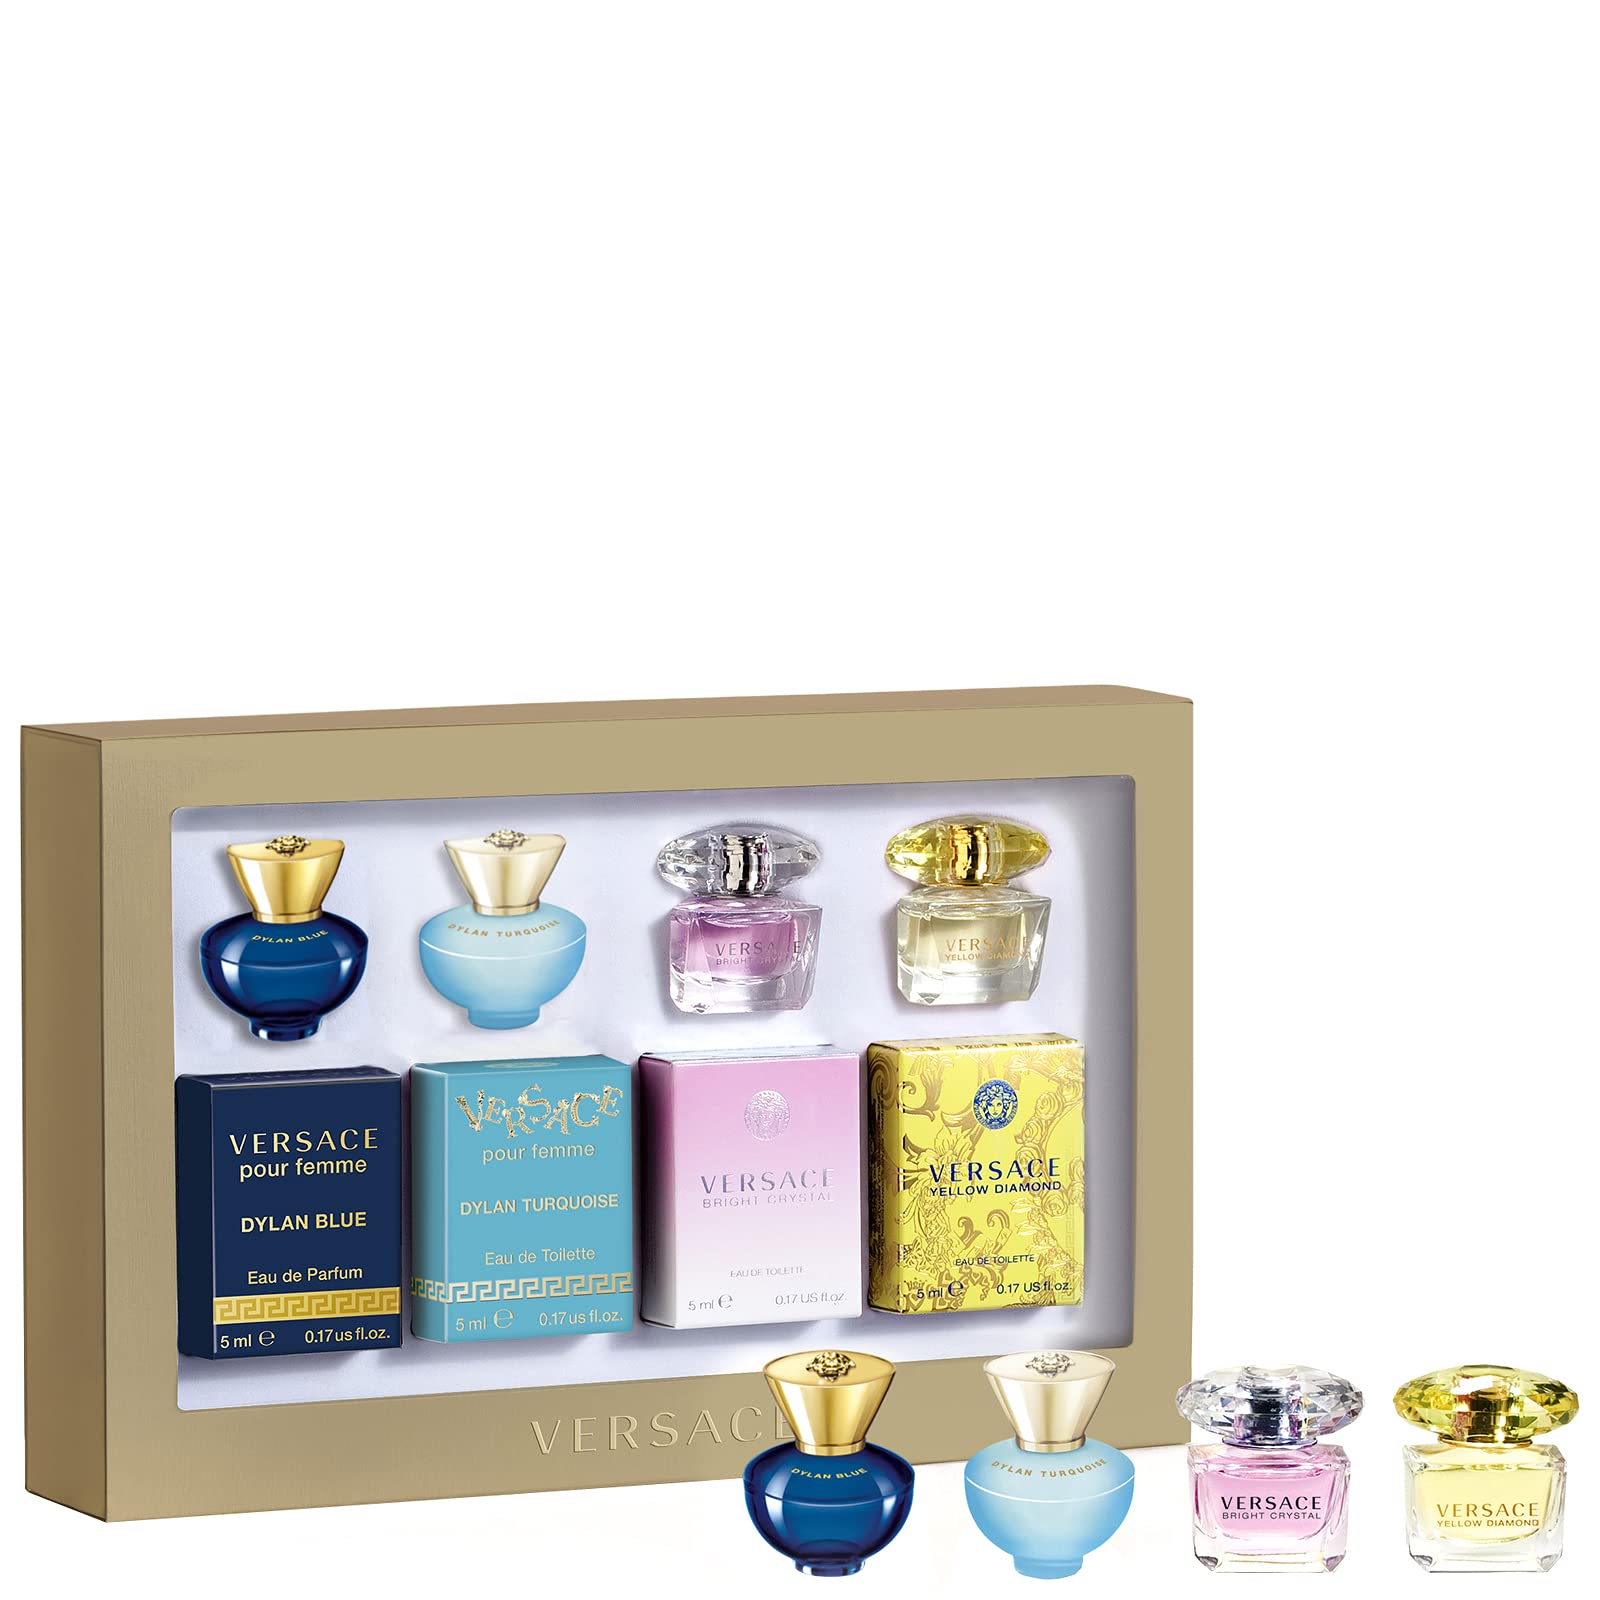 ''Versace Womens Mini PERFUME Gift Set 4 Piece Variety Collection (Pour Femme Dylan Blue 5ml EDP Spla